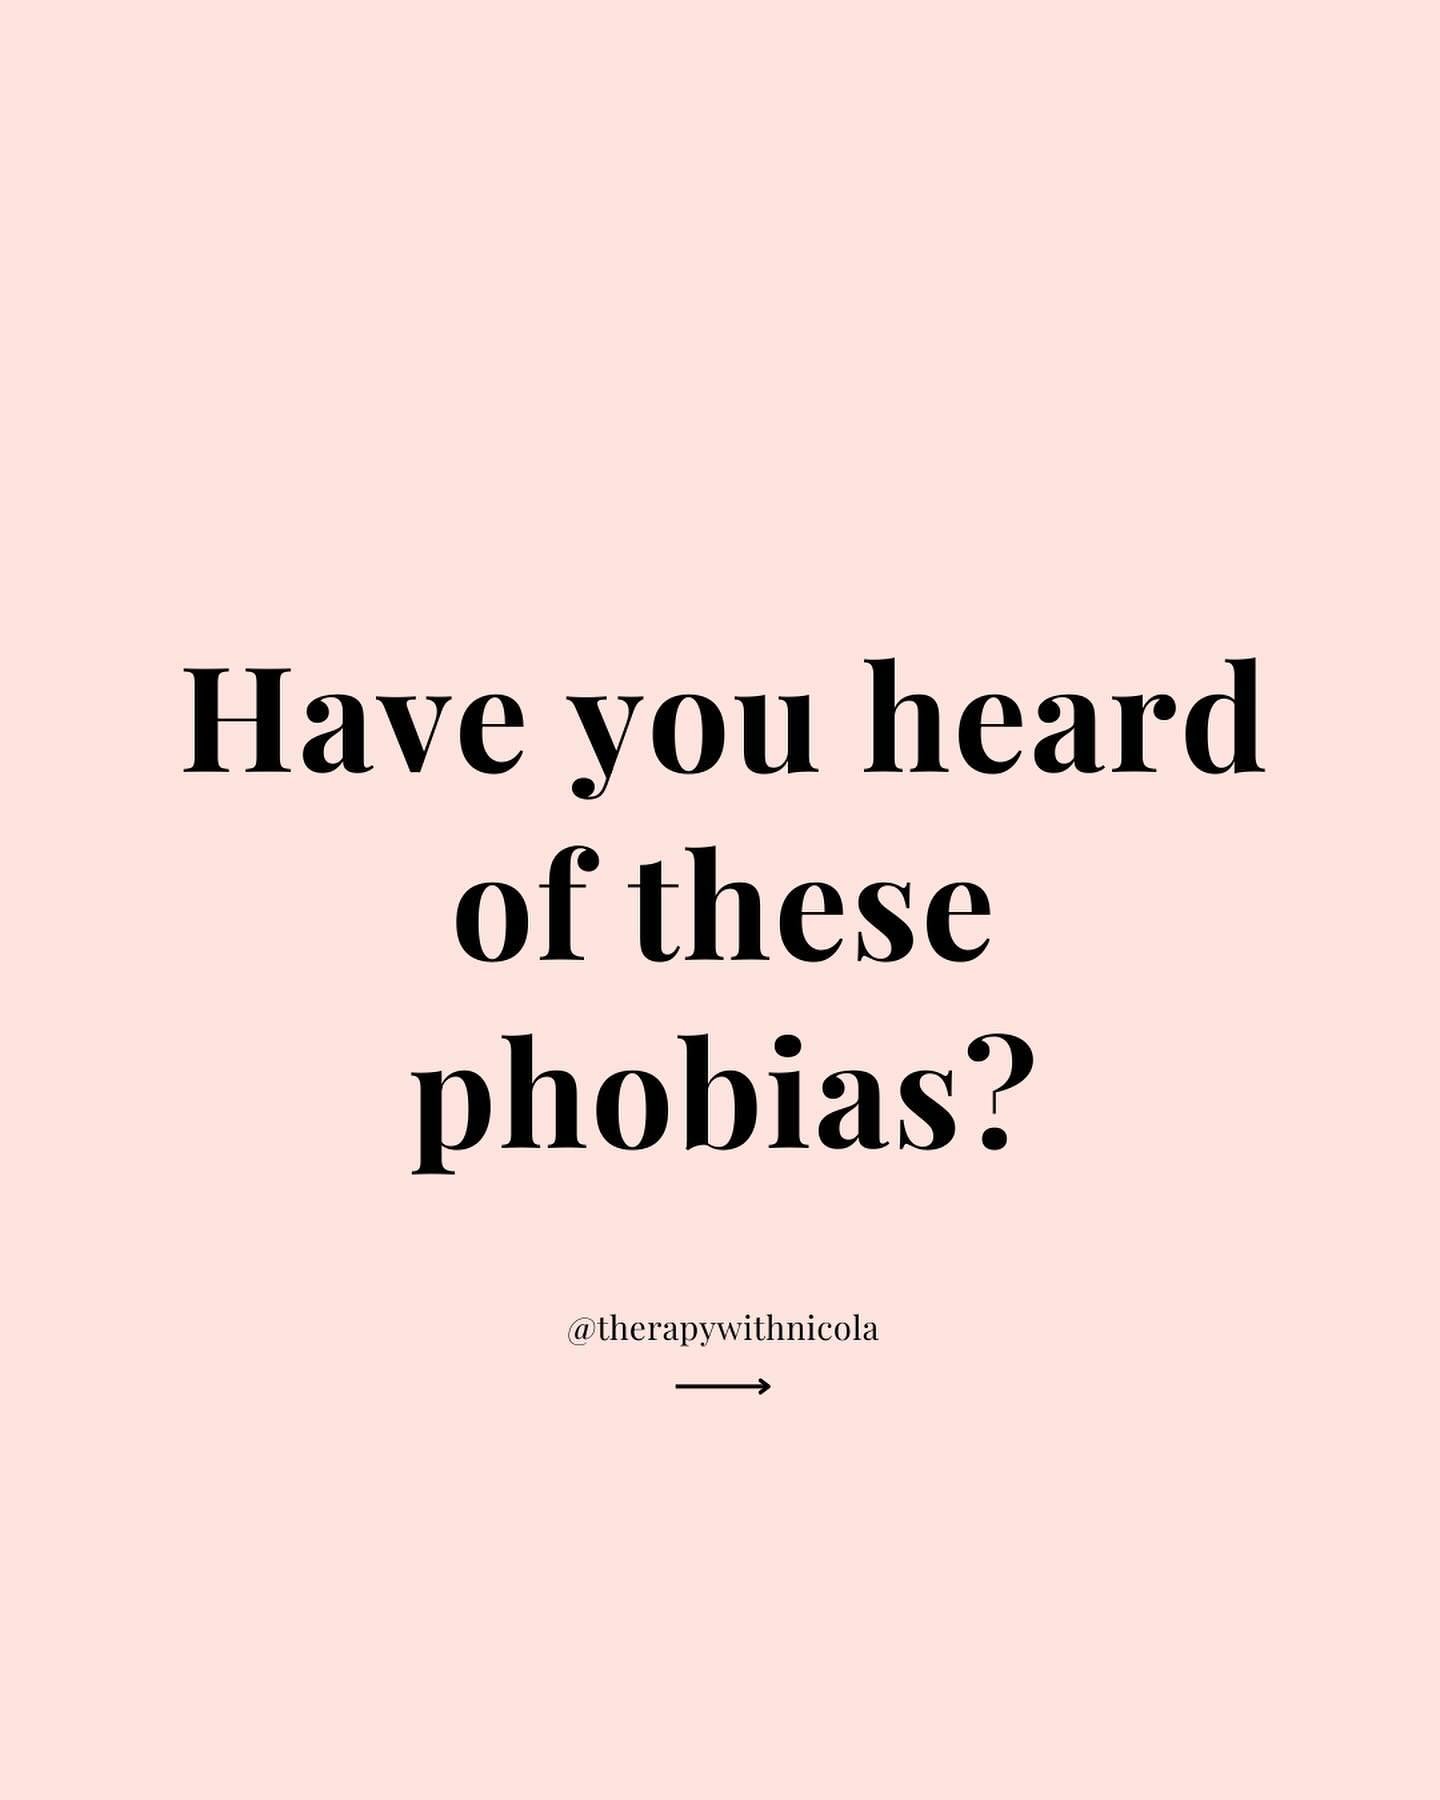 We can develop phobias for absolutely anything.

A Phobia is an irrational fear of not being in control.

Release the phobia by taking back control

Get in touch to book an appointment

Click the link in bio or visit www.therapywithnicola.com

Appoin